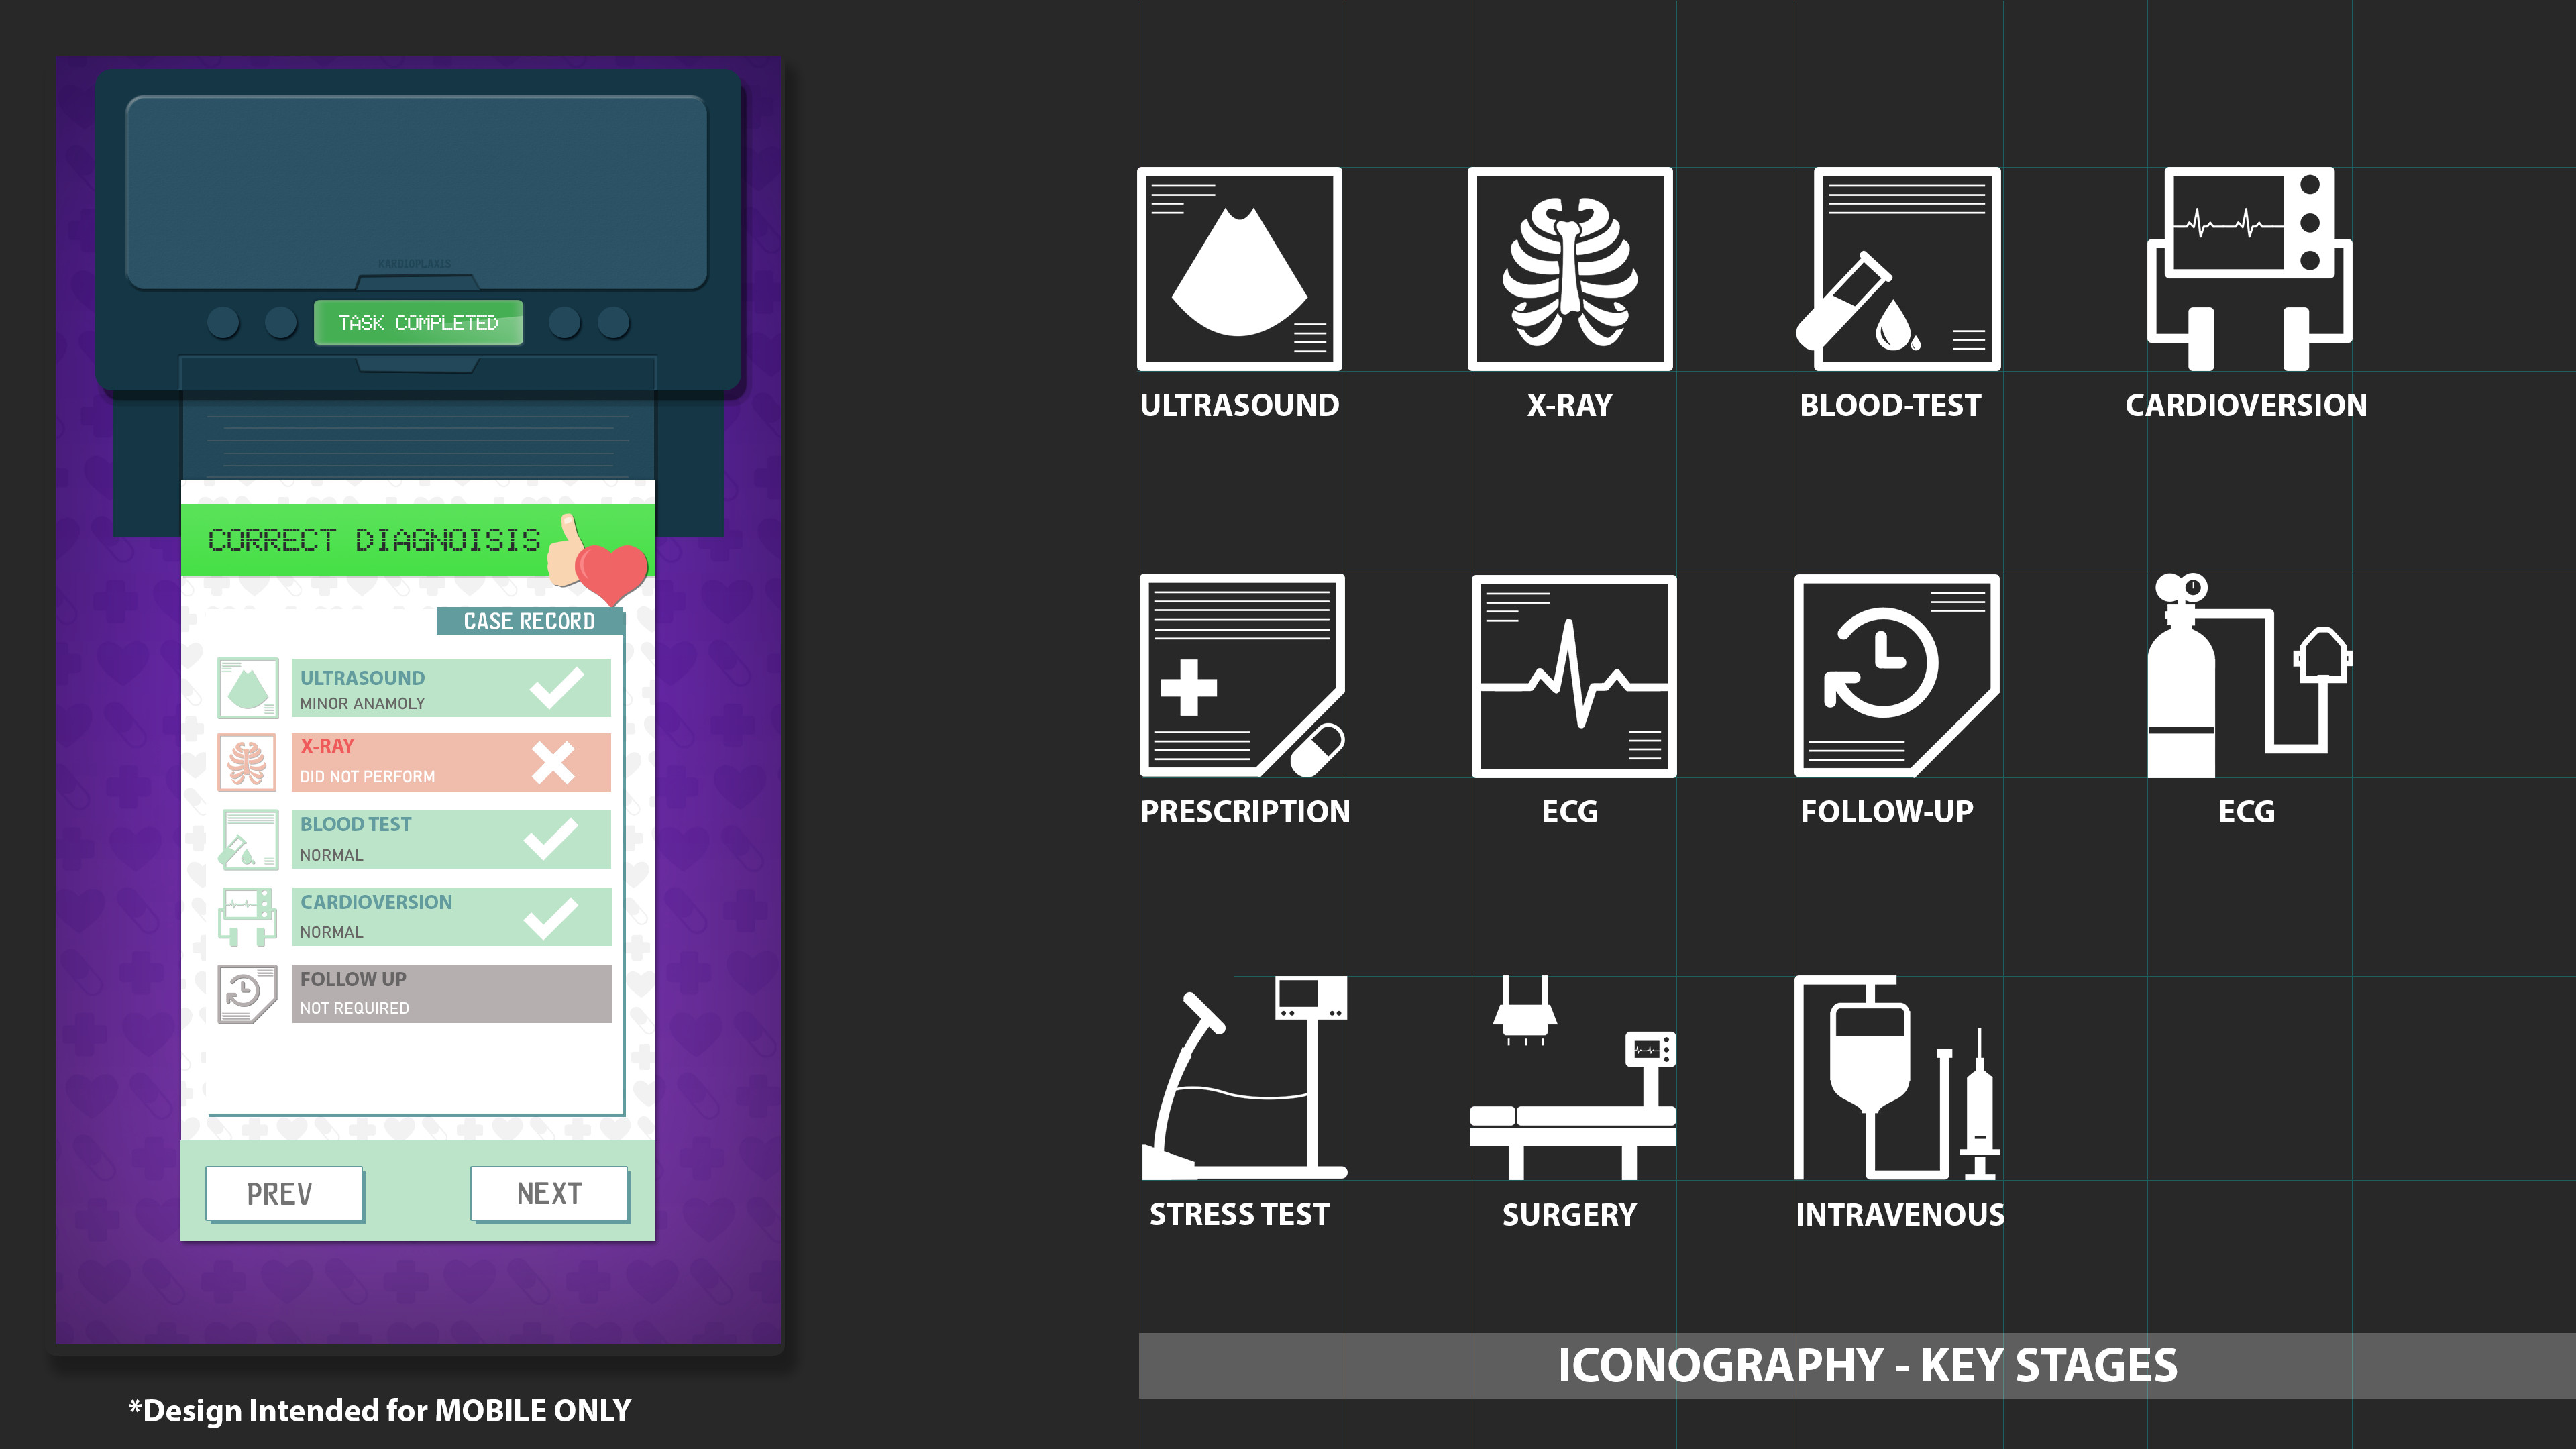 Iconography for Patient Diagnosis Screen